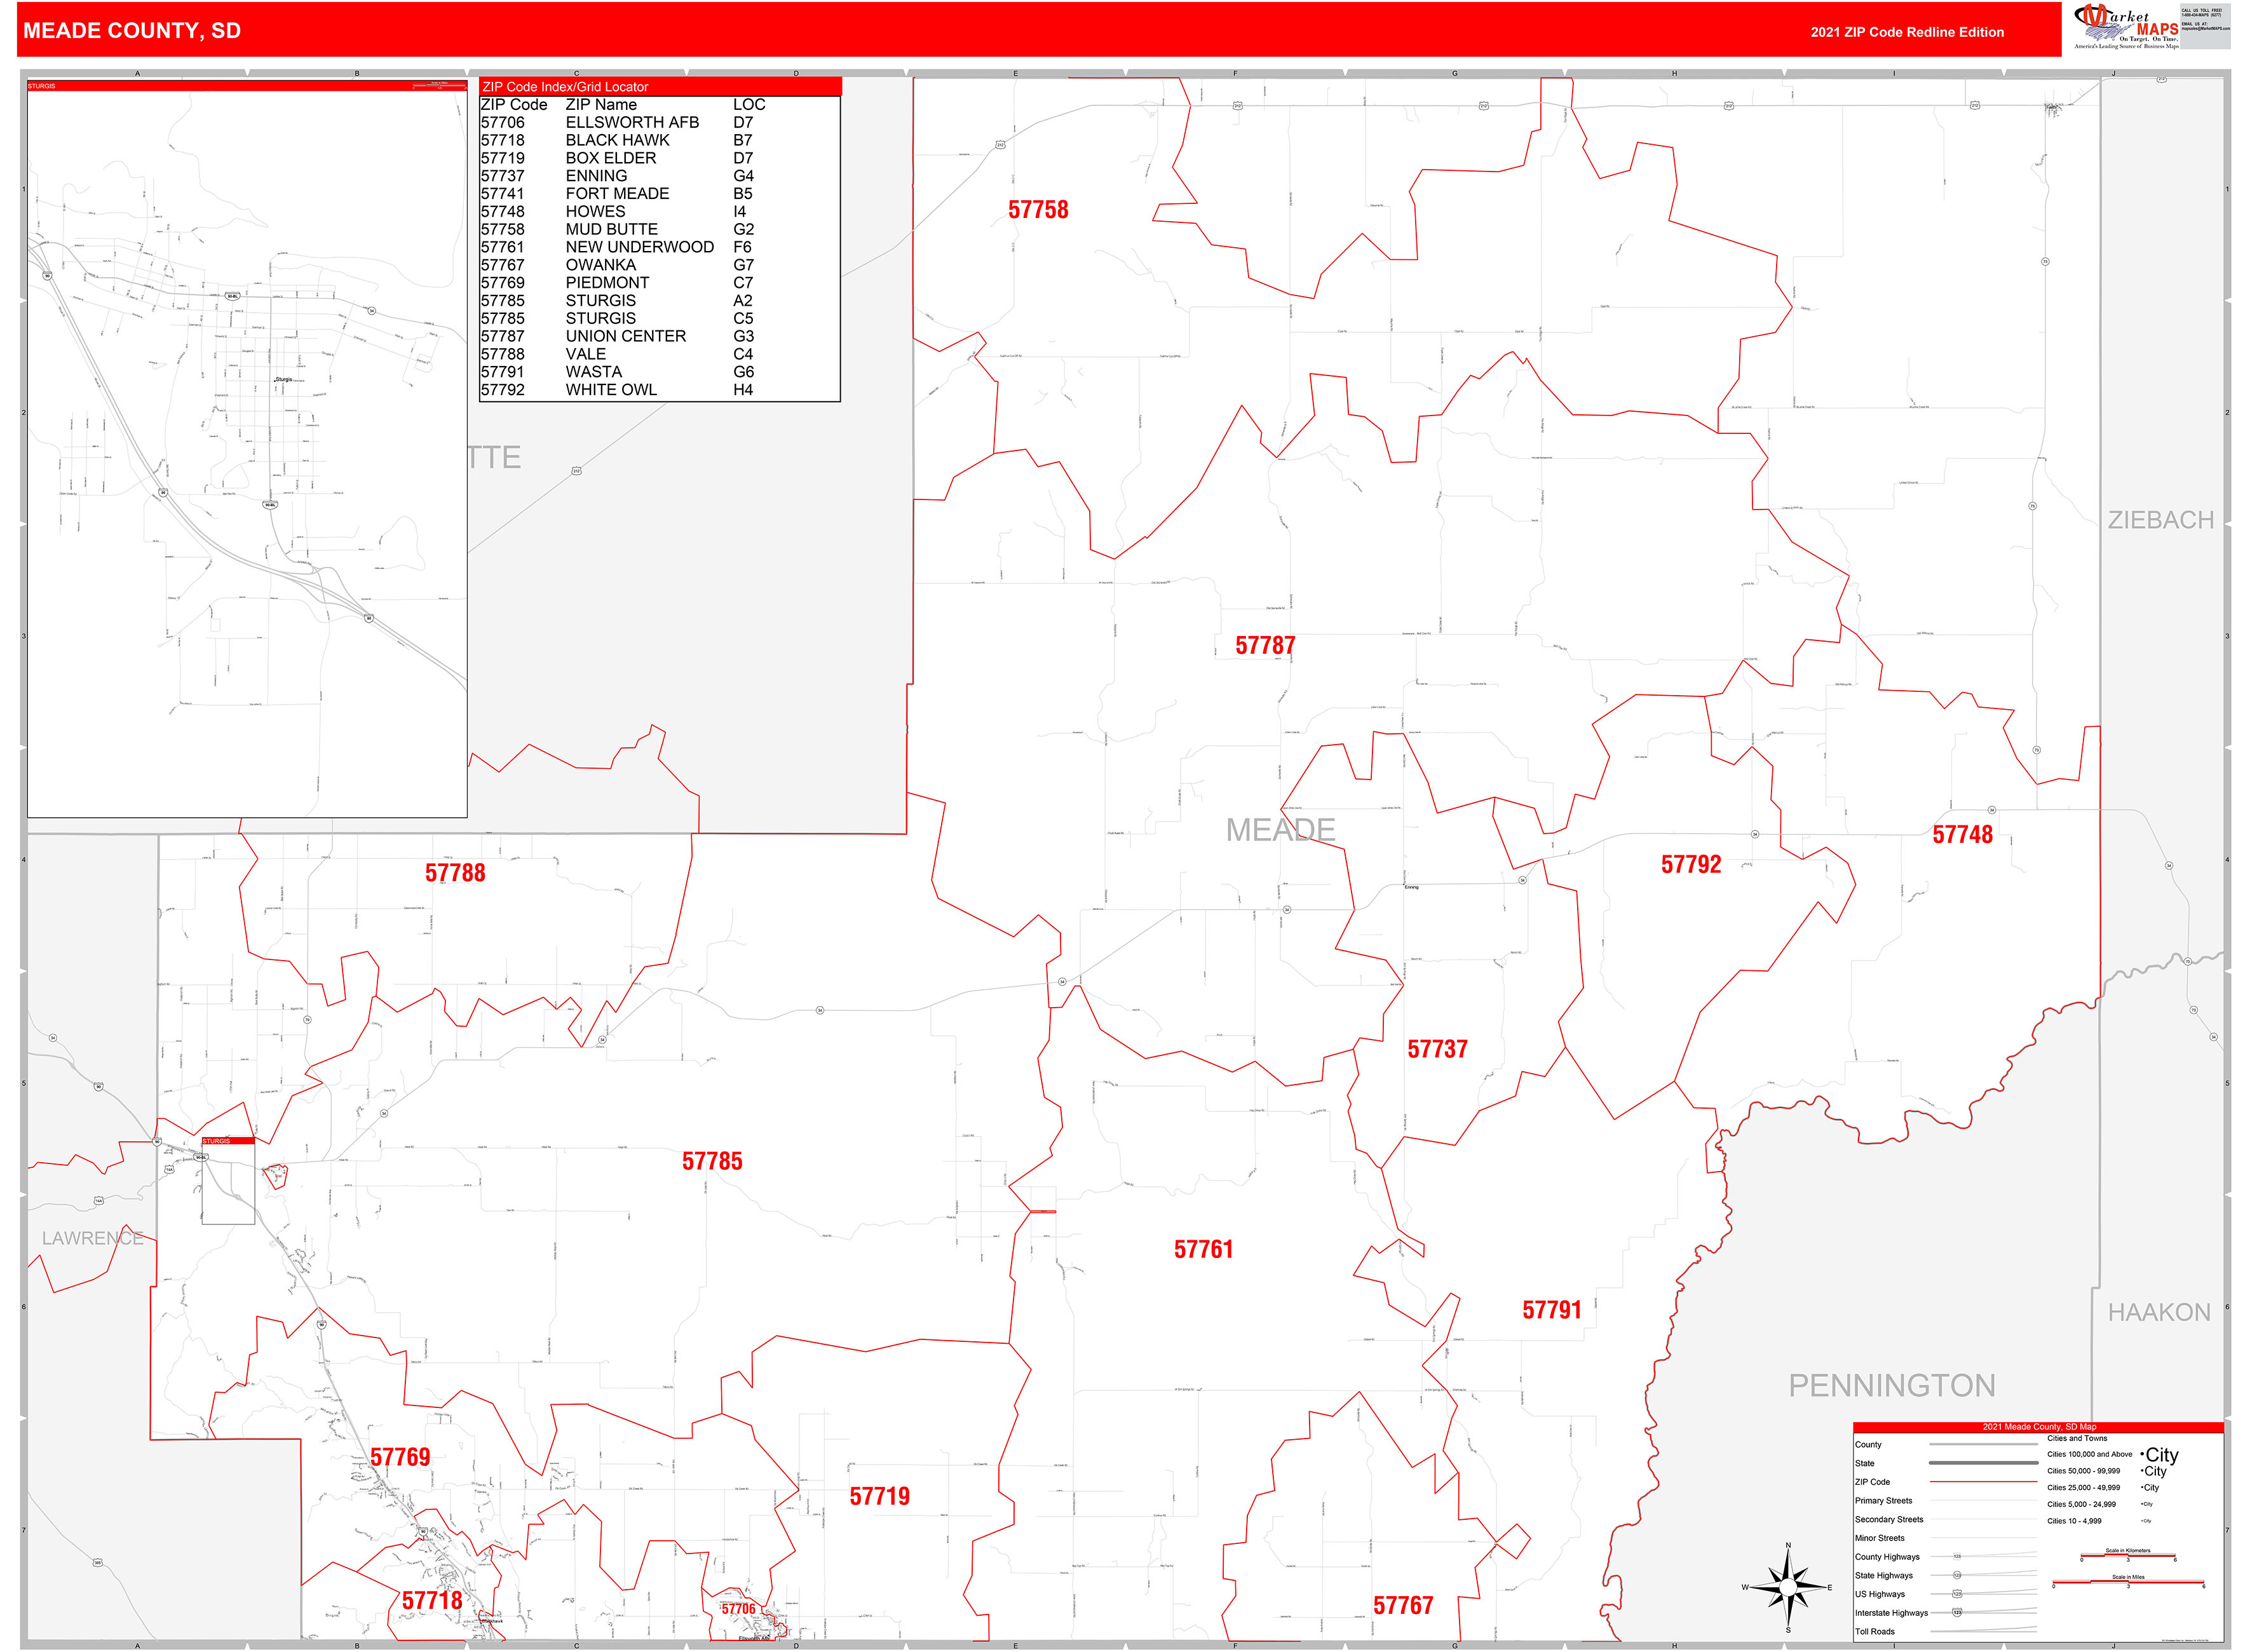 Meade County, SD Zip Code Wall Map Red Line Style by MarketMAPS MapSales